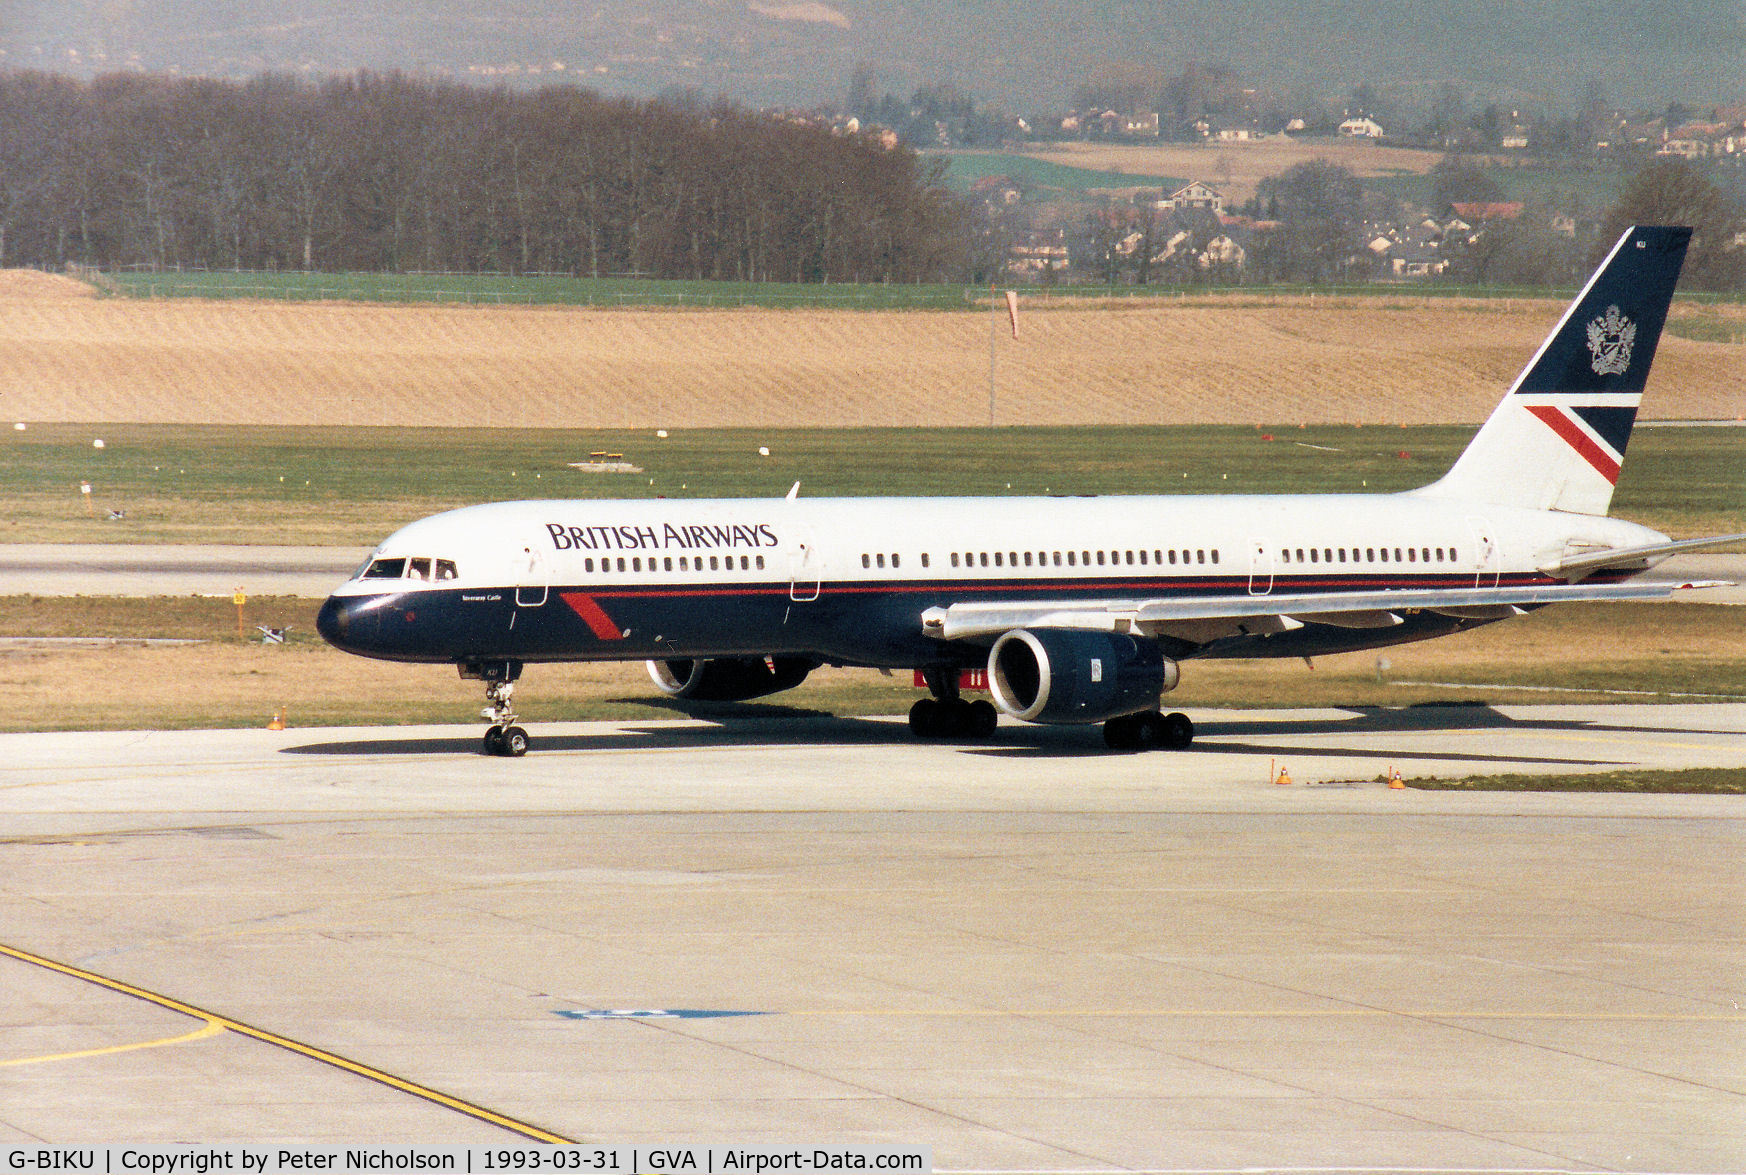 G-BIKU, 1985 Boeing 757-236 C/N 23399, Boeing 757-236 named Inveraray Castle of British Airways taxying to the terminal at Geneva in March 1993.